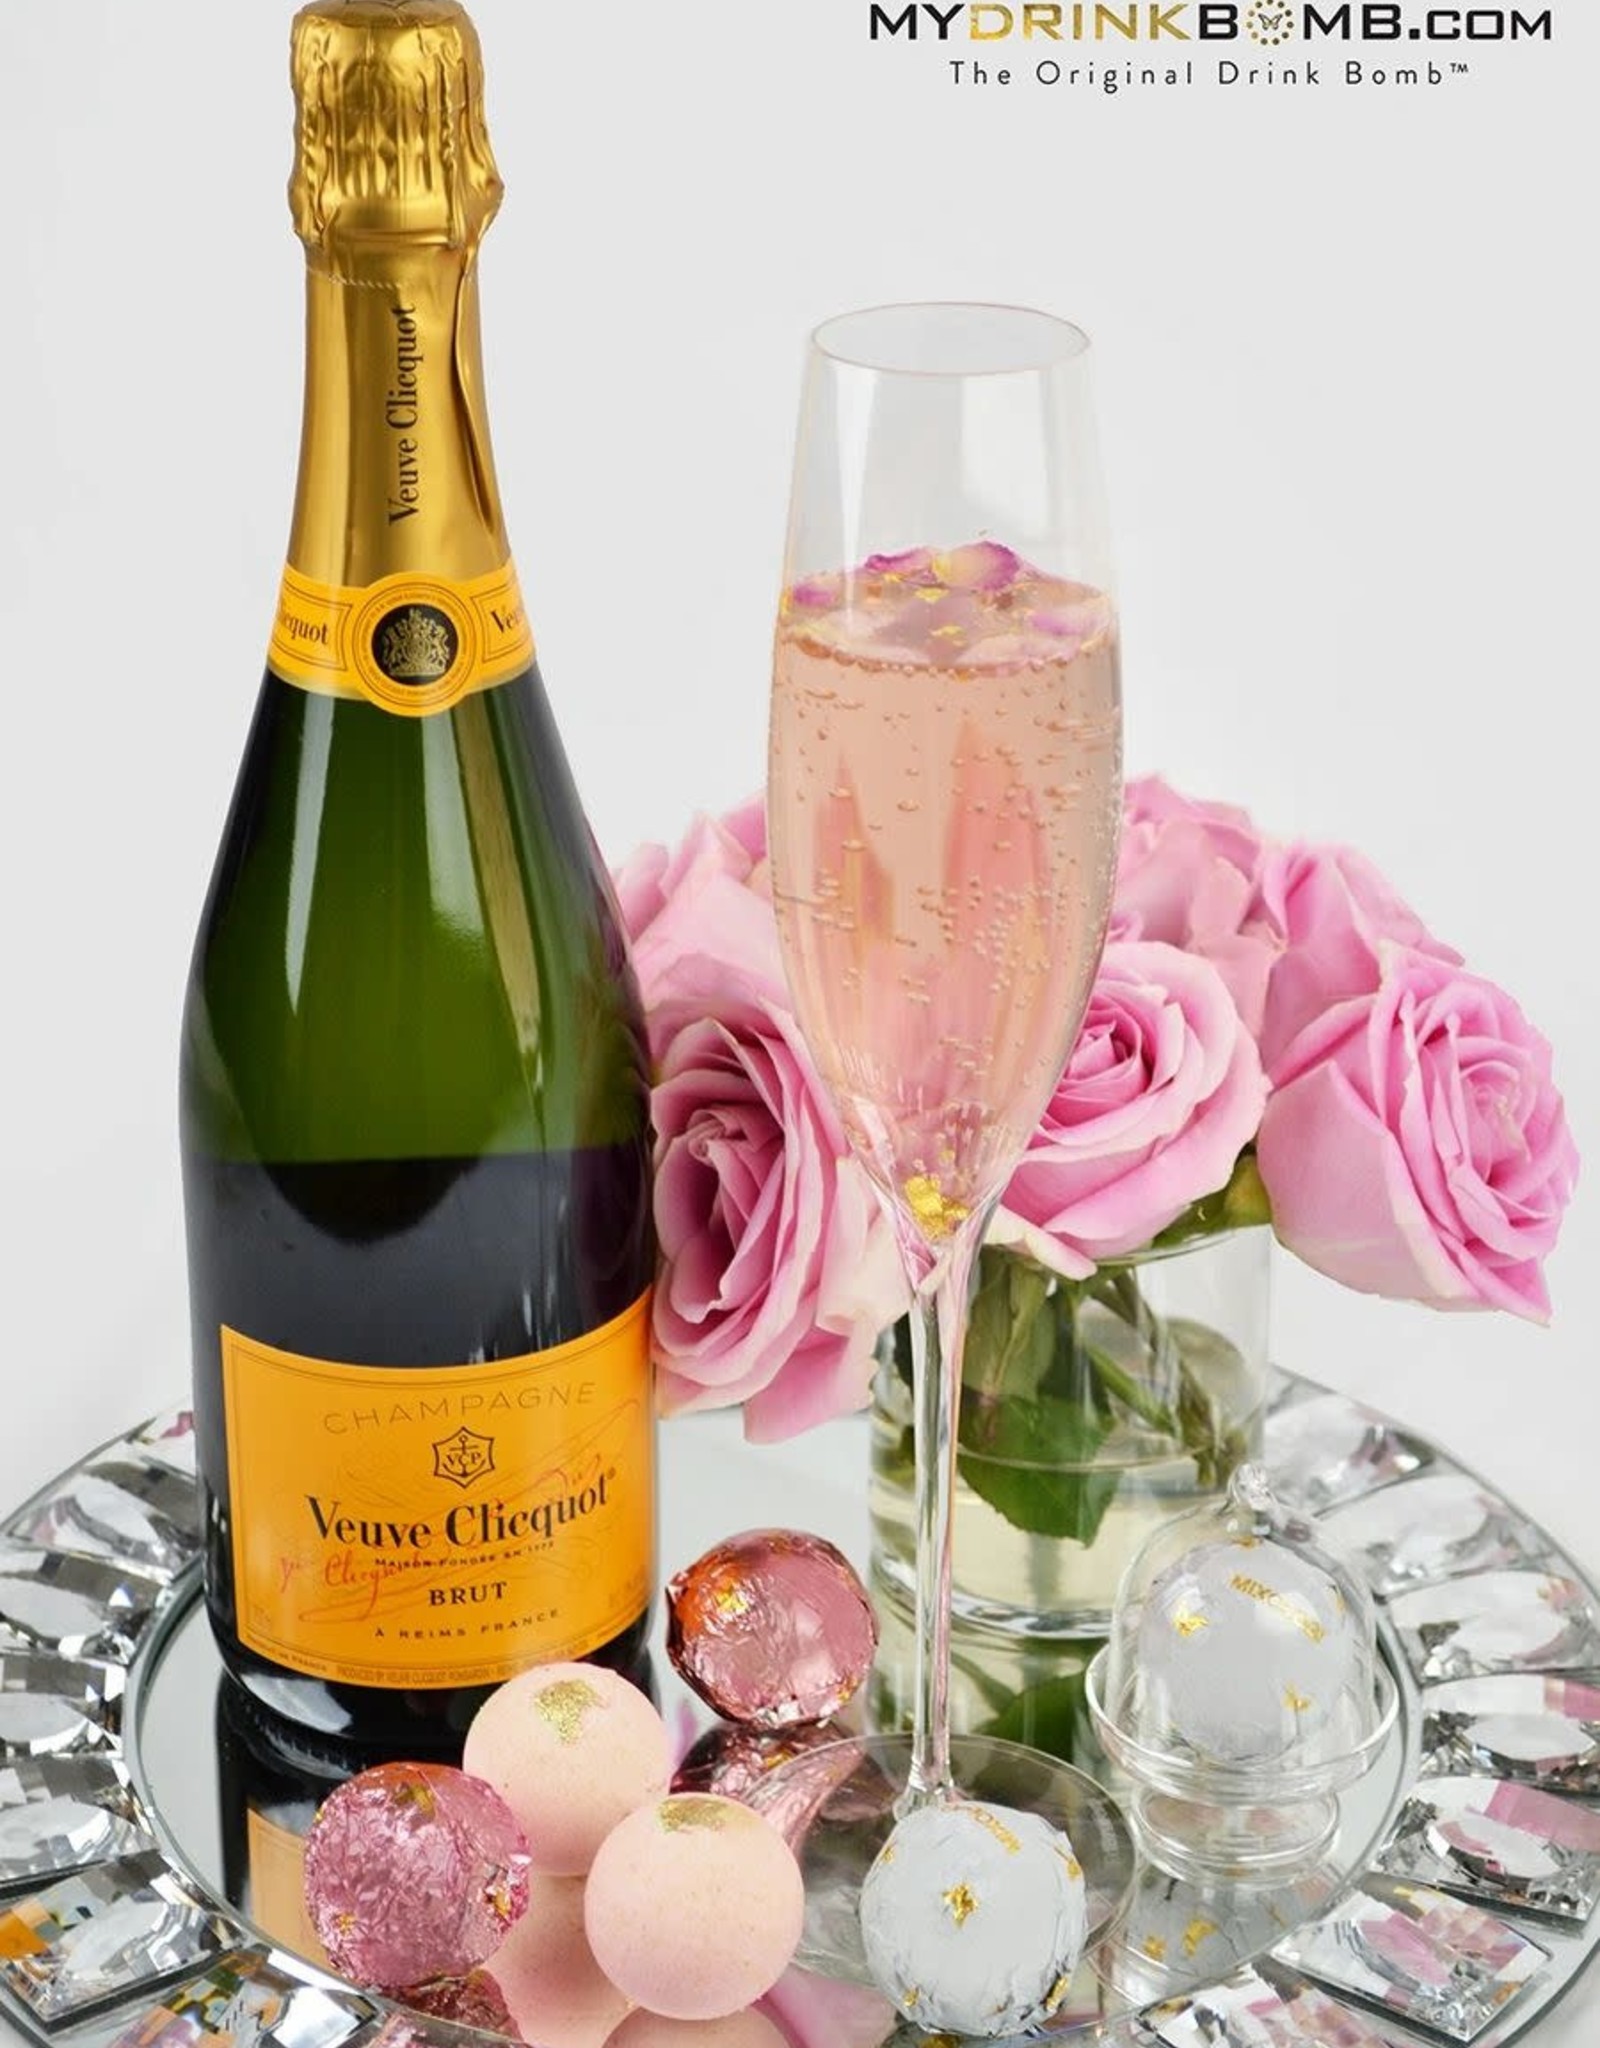 My Drink Bomb - Prosecco Rose - Set of 2